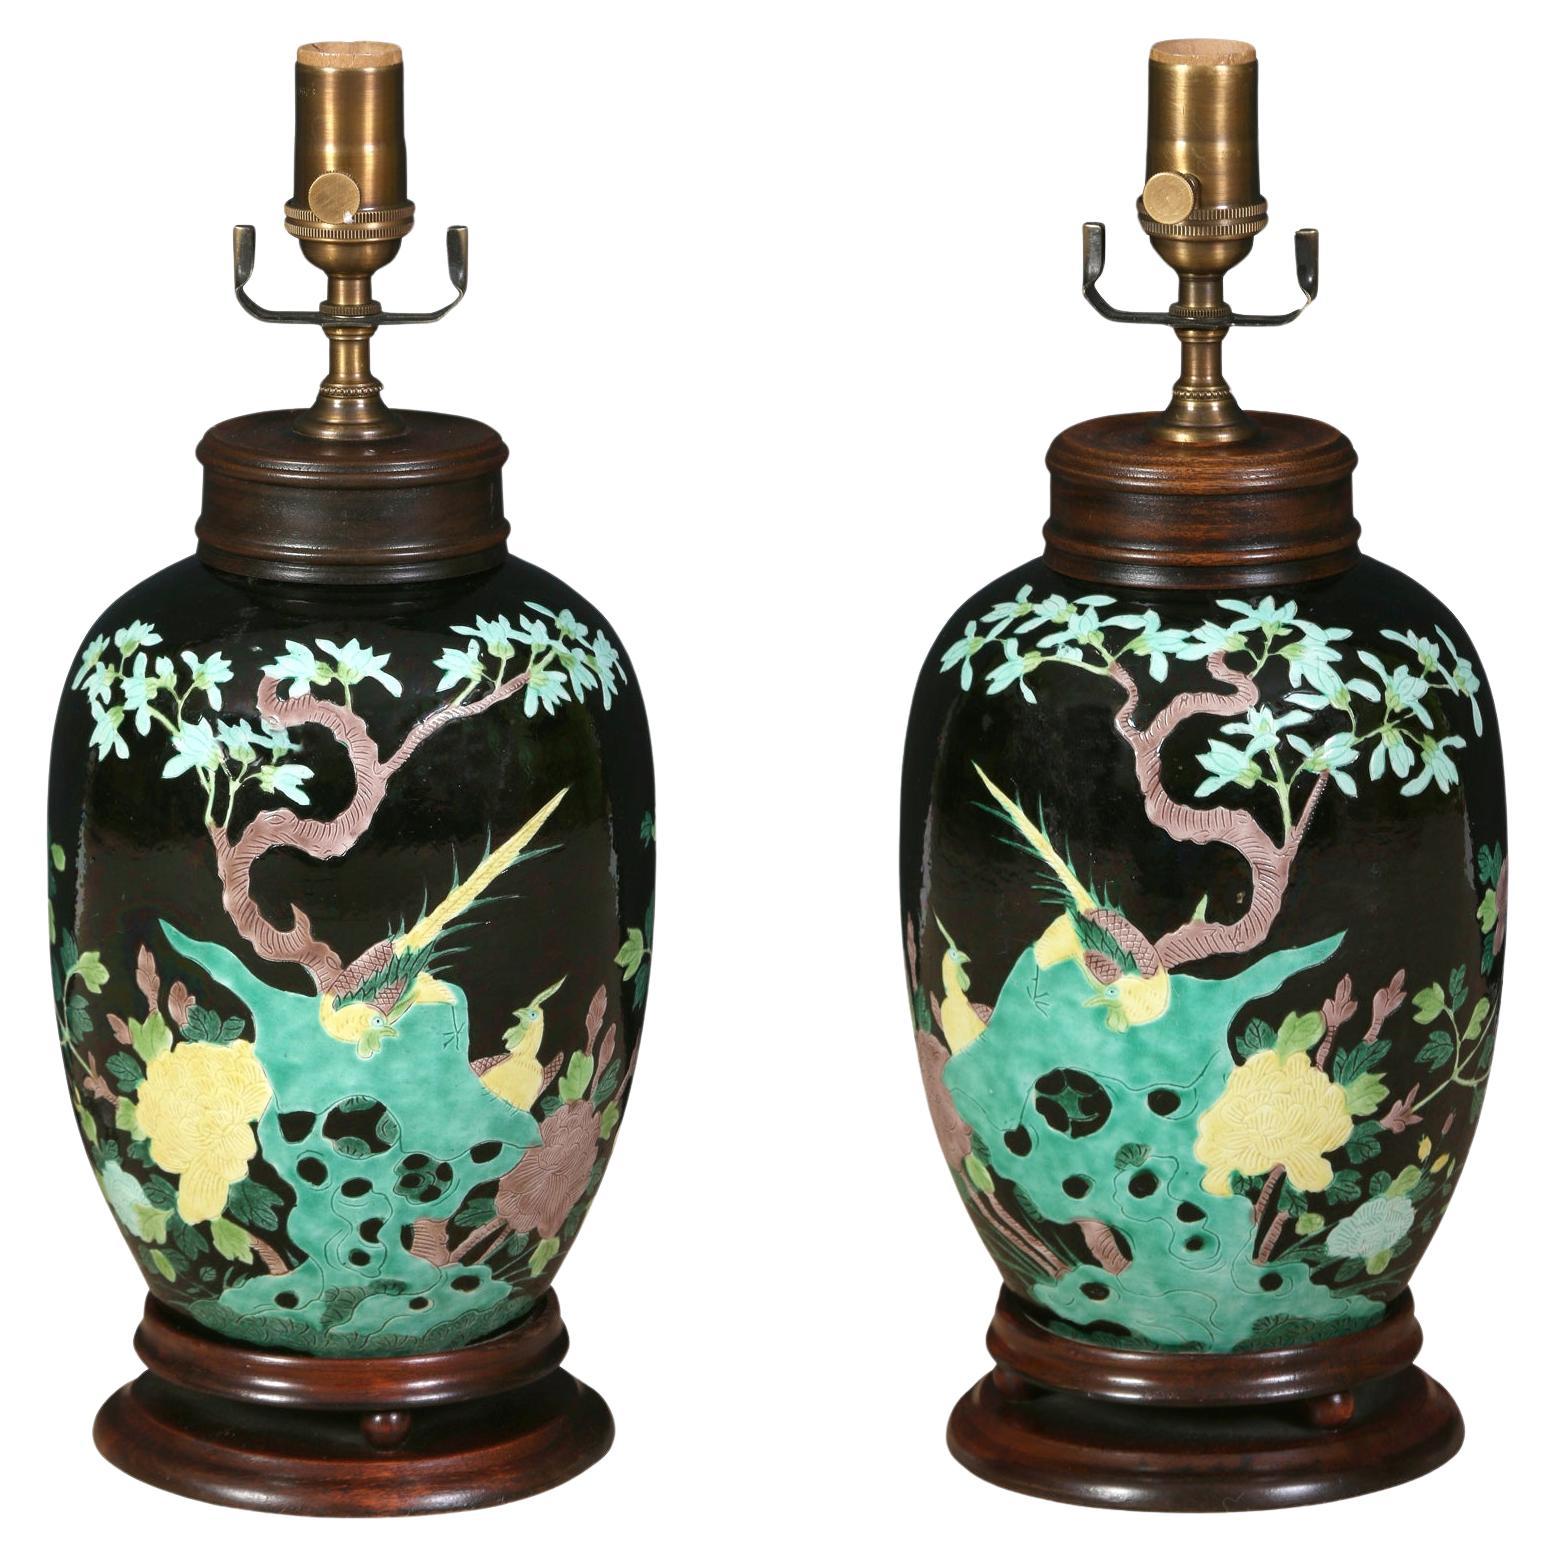 A Pair of Black Chinese Porcelain Lamps with Floral Design on Wood Base For Sale